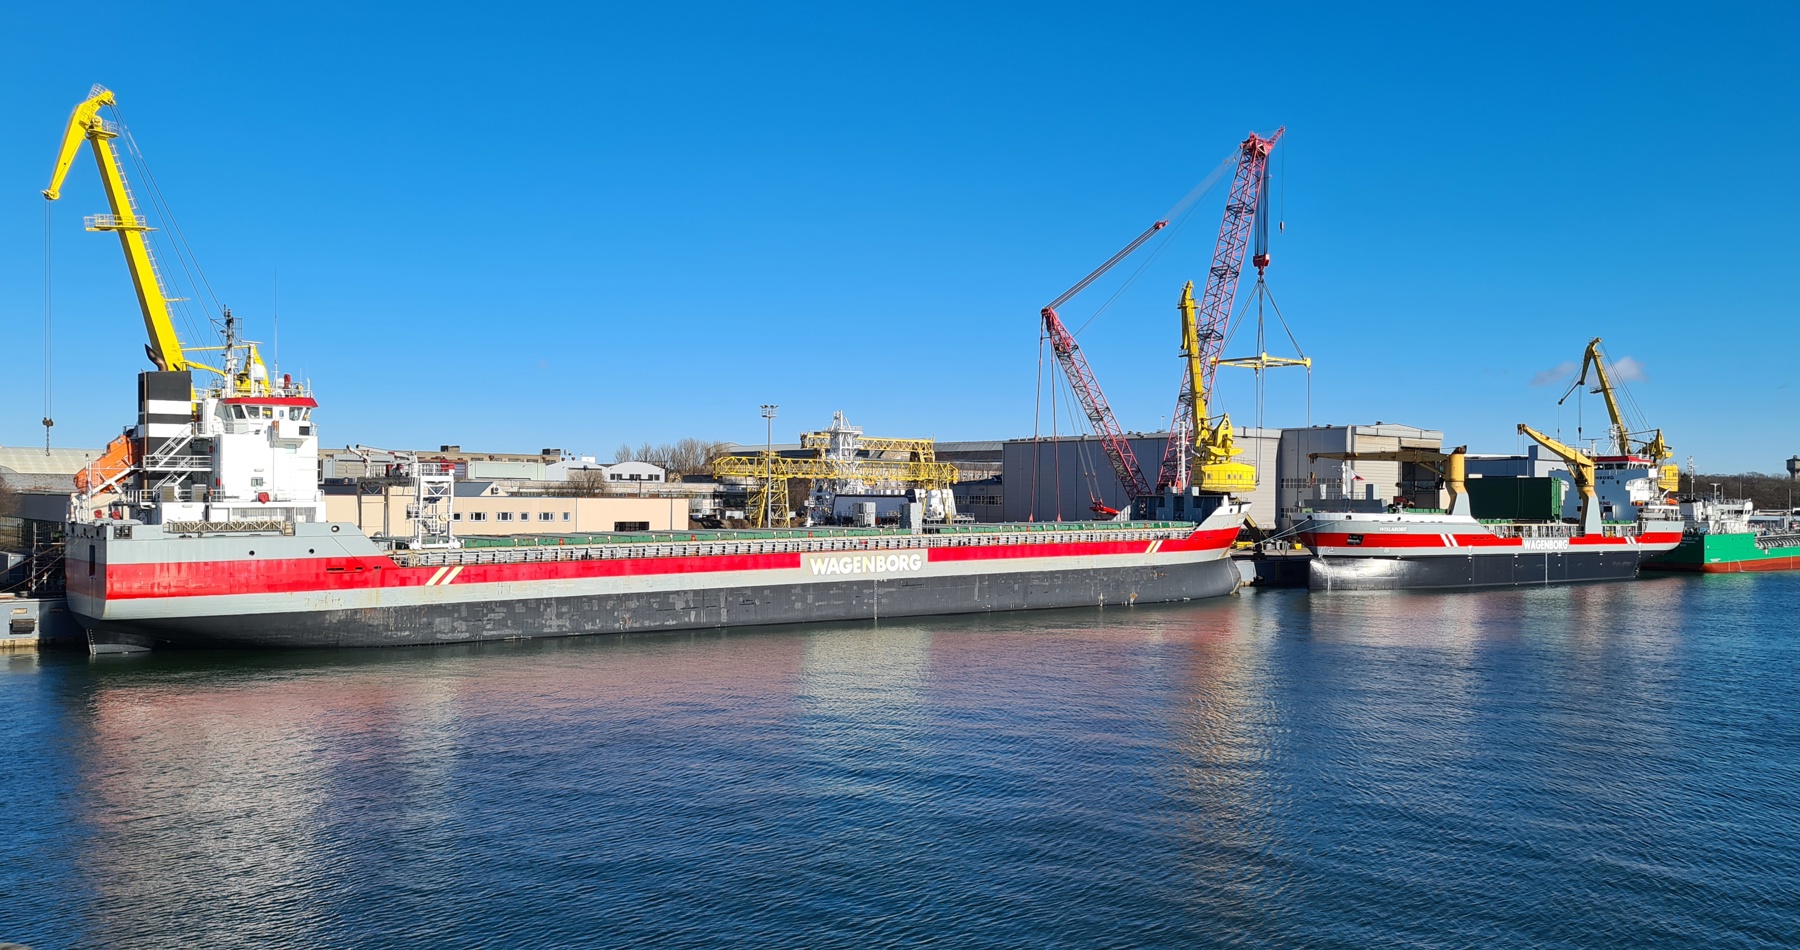 Adriaticborg, Fraserborg and Wislaborg provided with ballast water treatment system